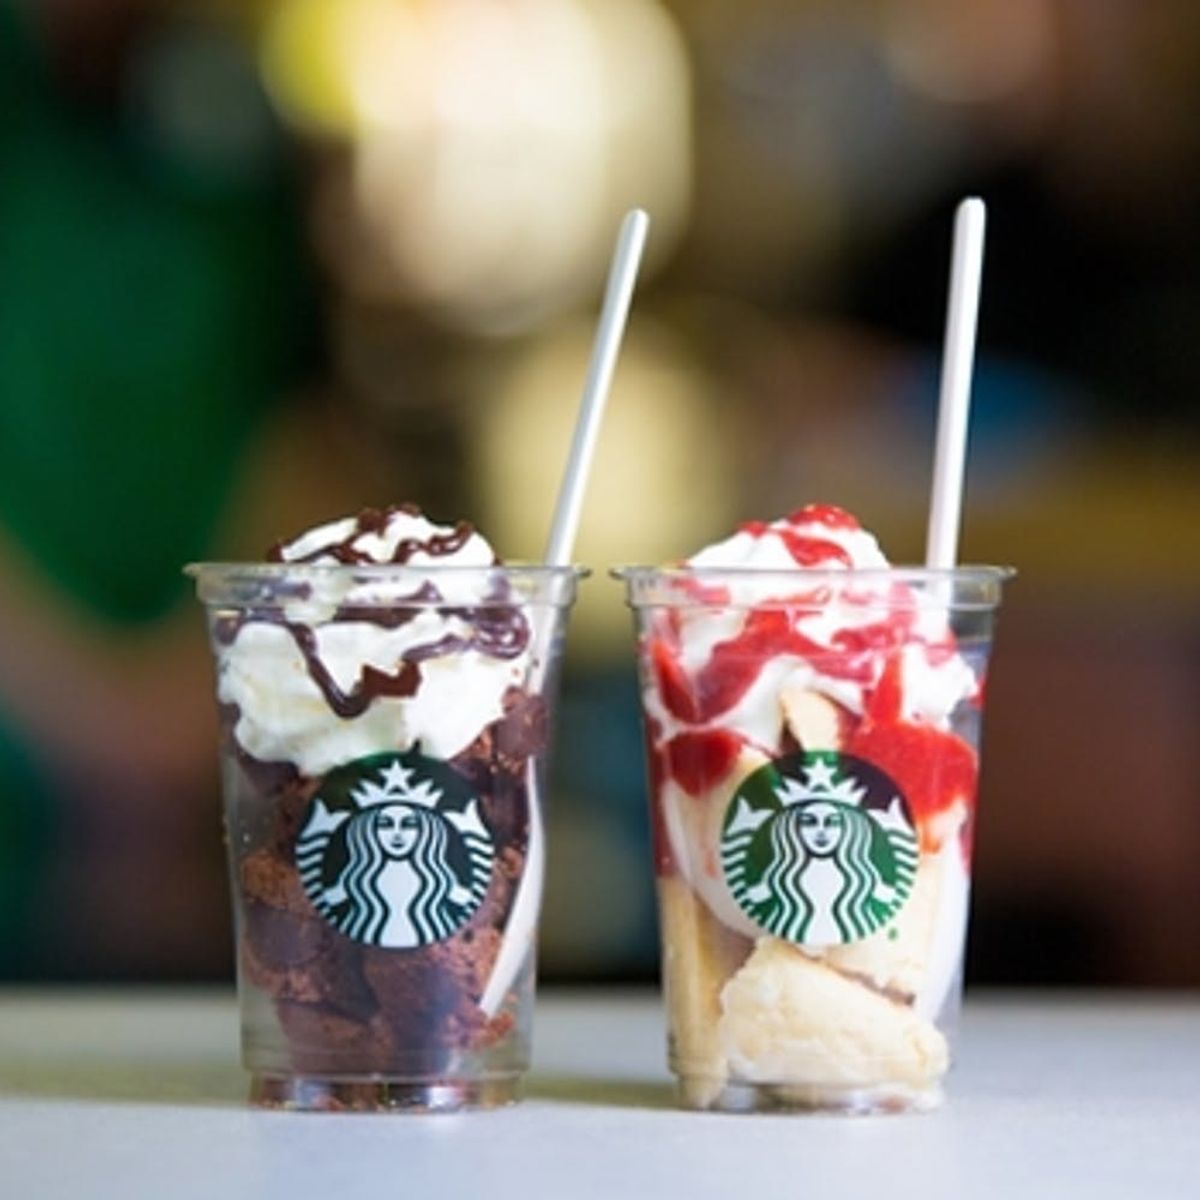 Check Out Starbucks’ New and Delicious Sunset Menu